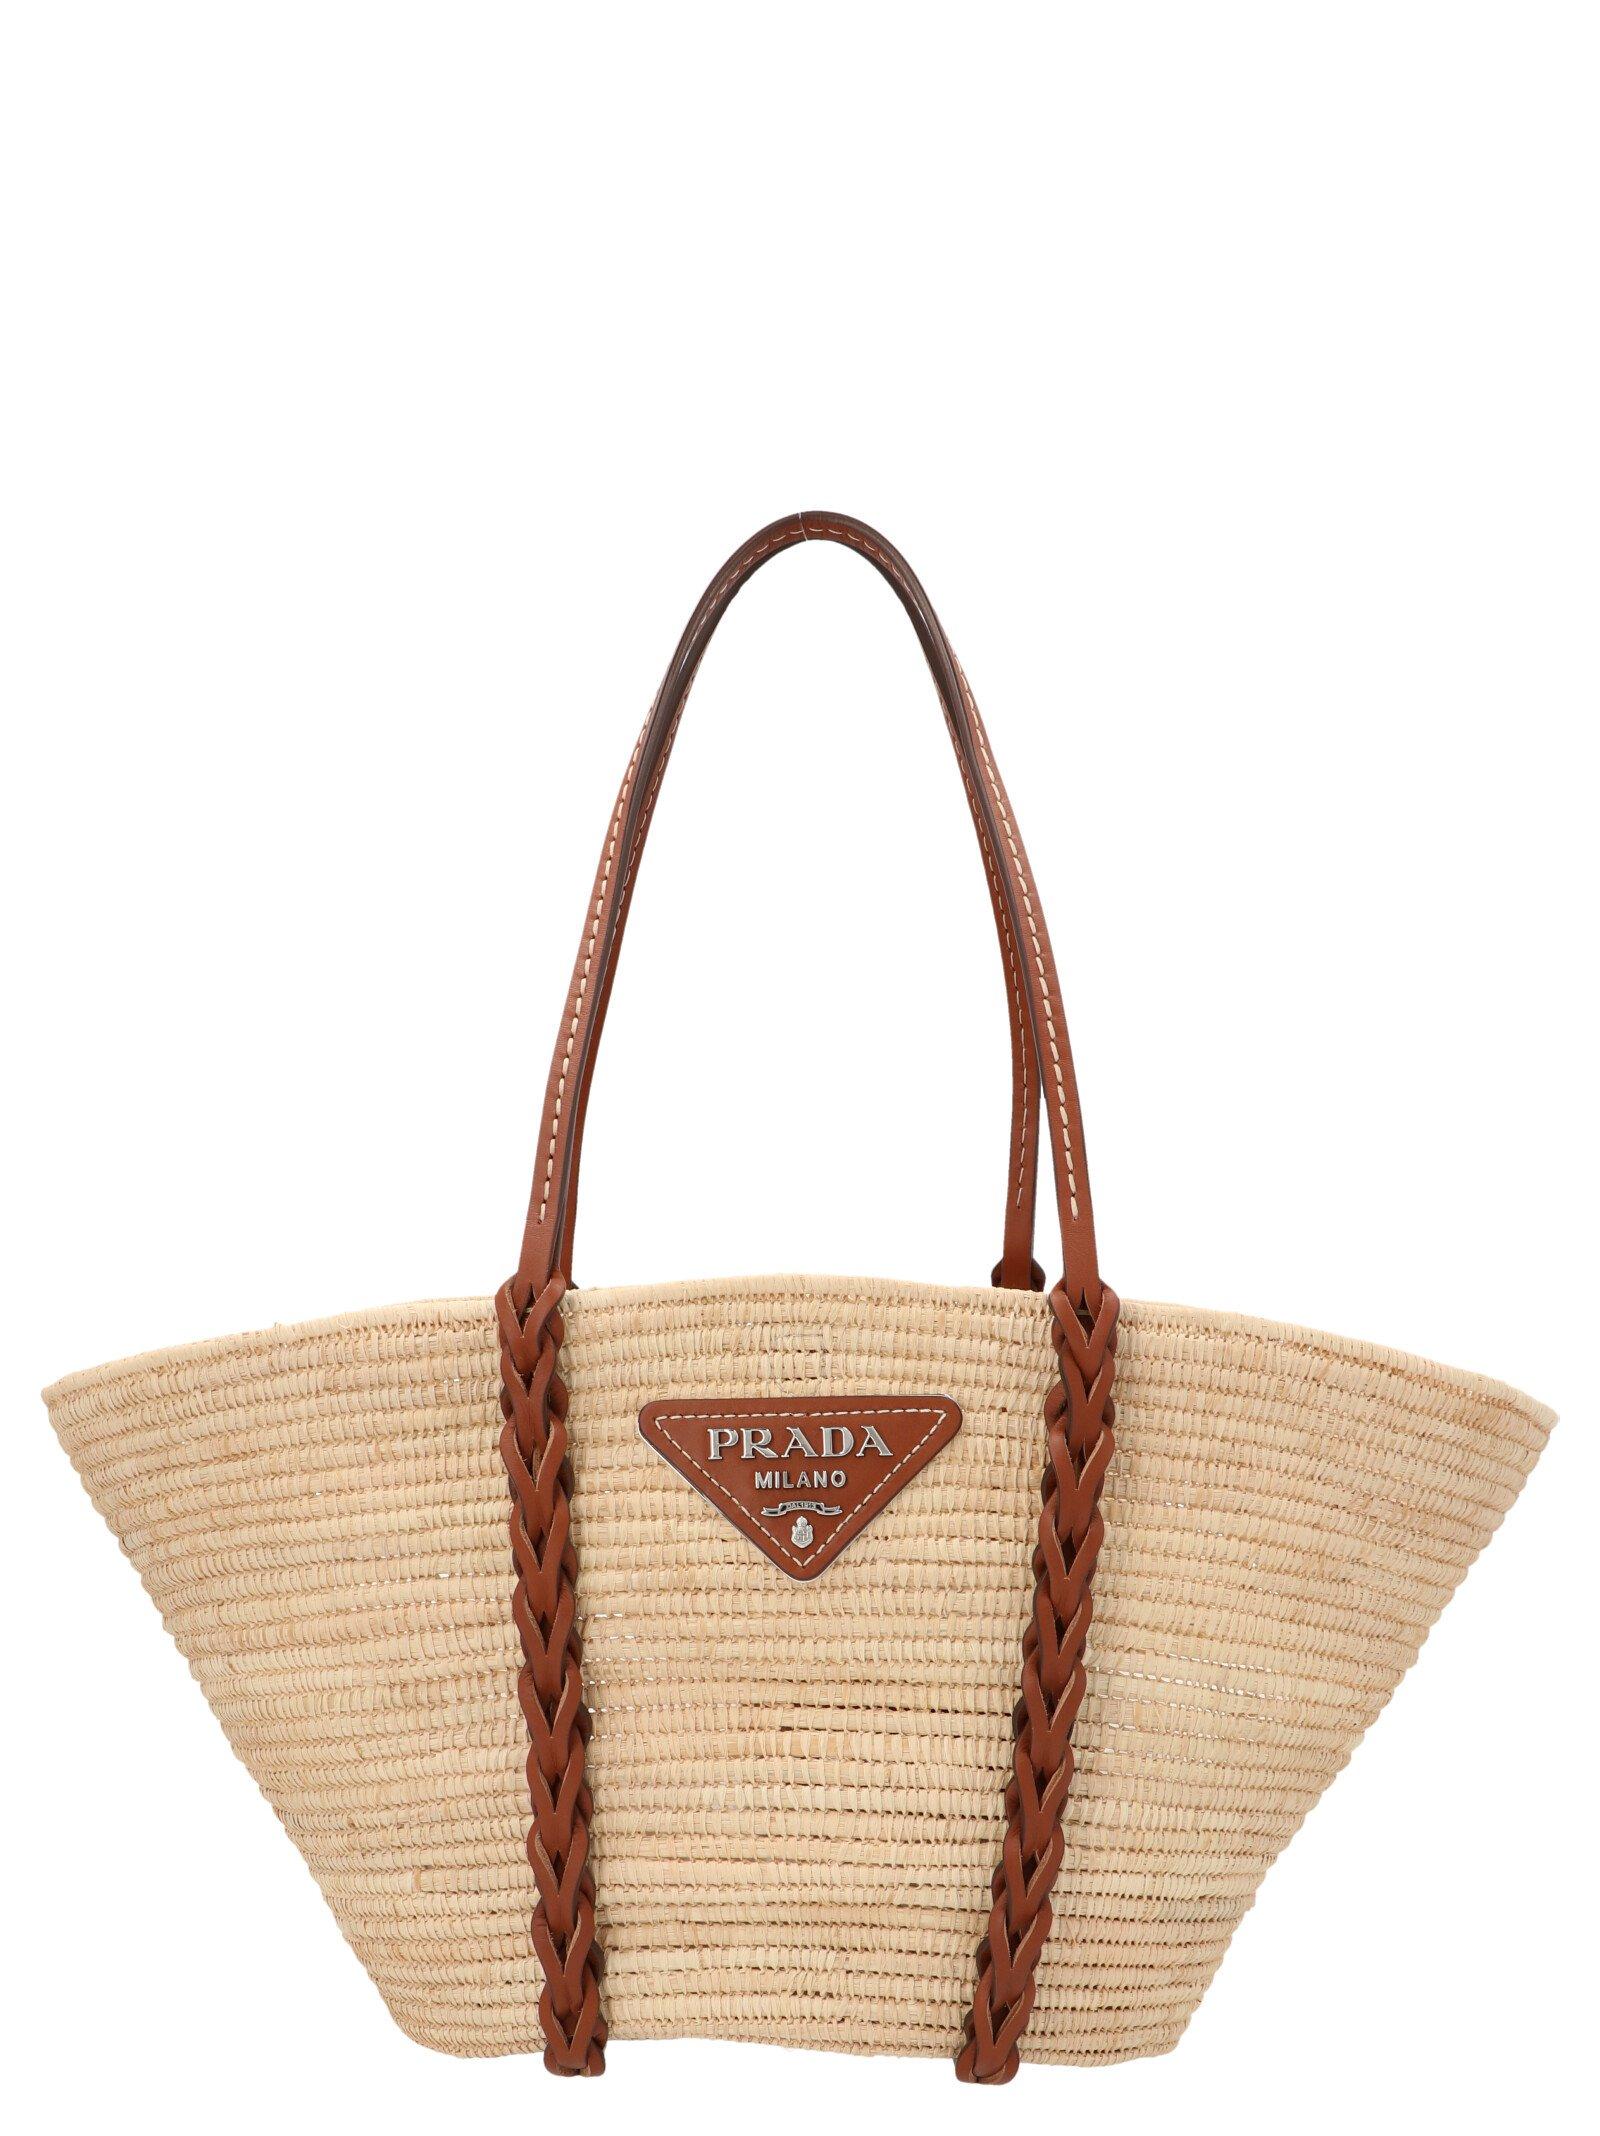 Prada Leather Wicker Woven Tote Bag in Natural | Lyst